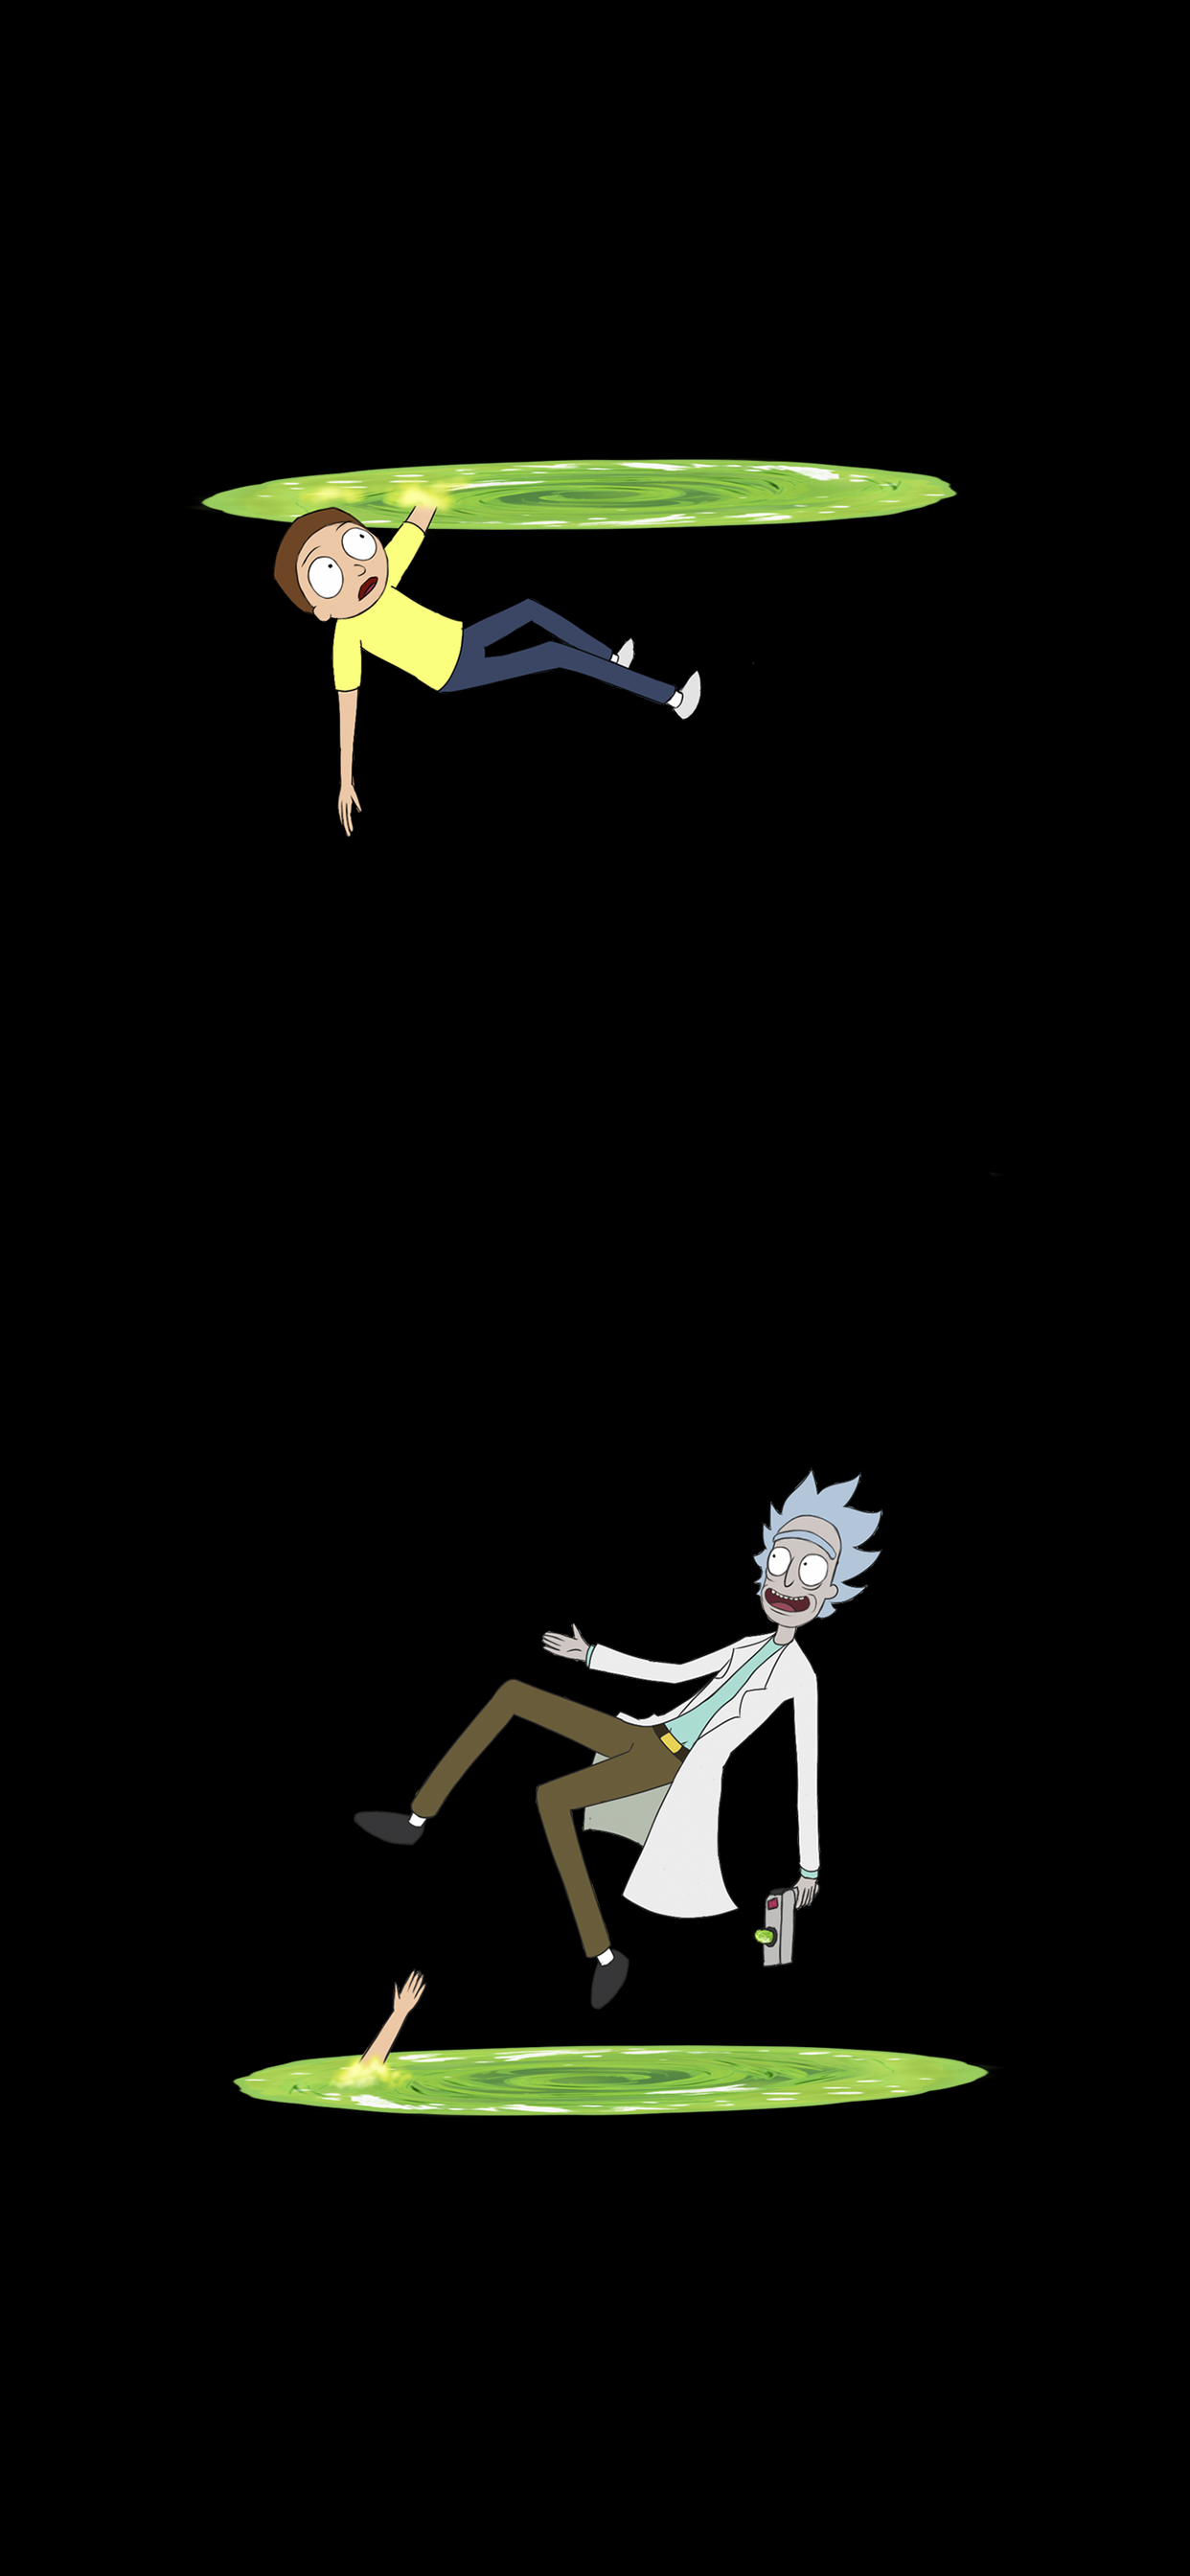 Rick and Morty phone wallpapers collection 152